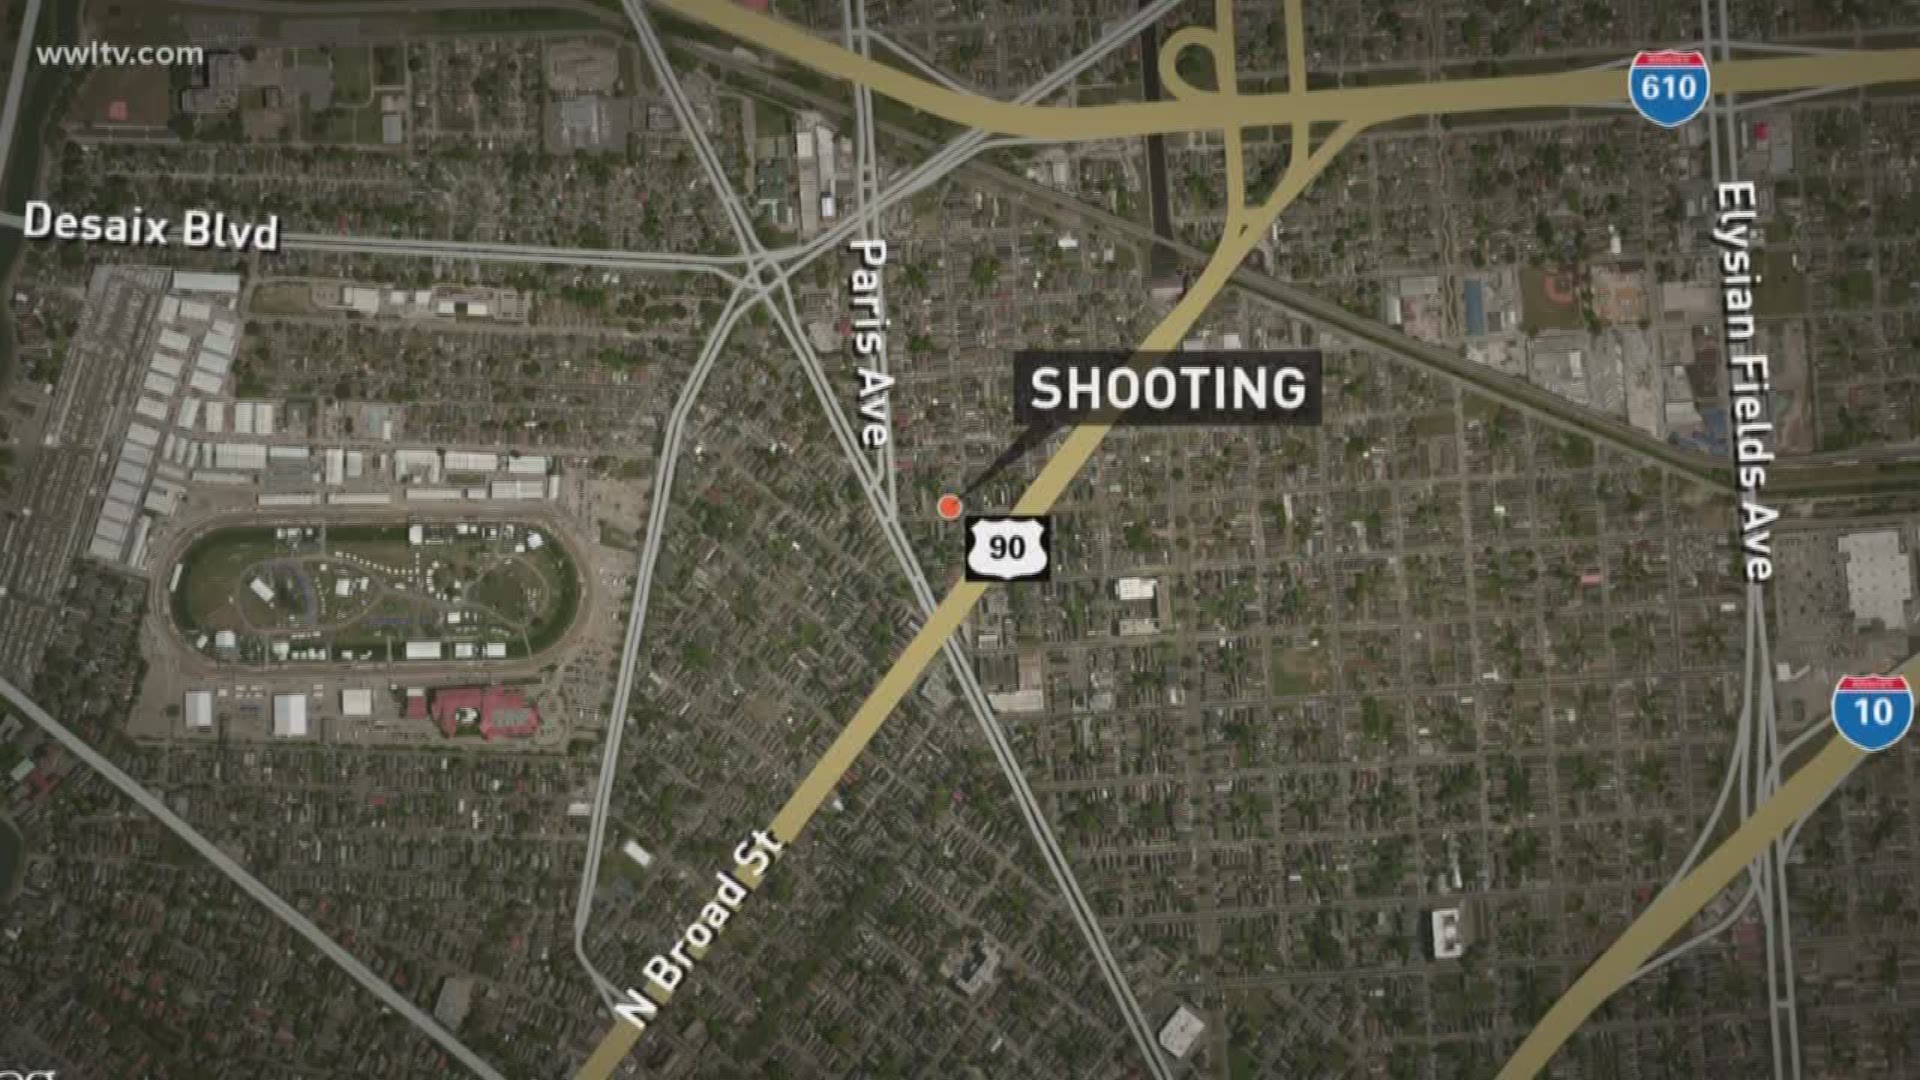 Police say a man was shot in the head.